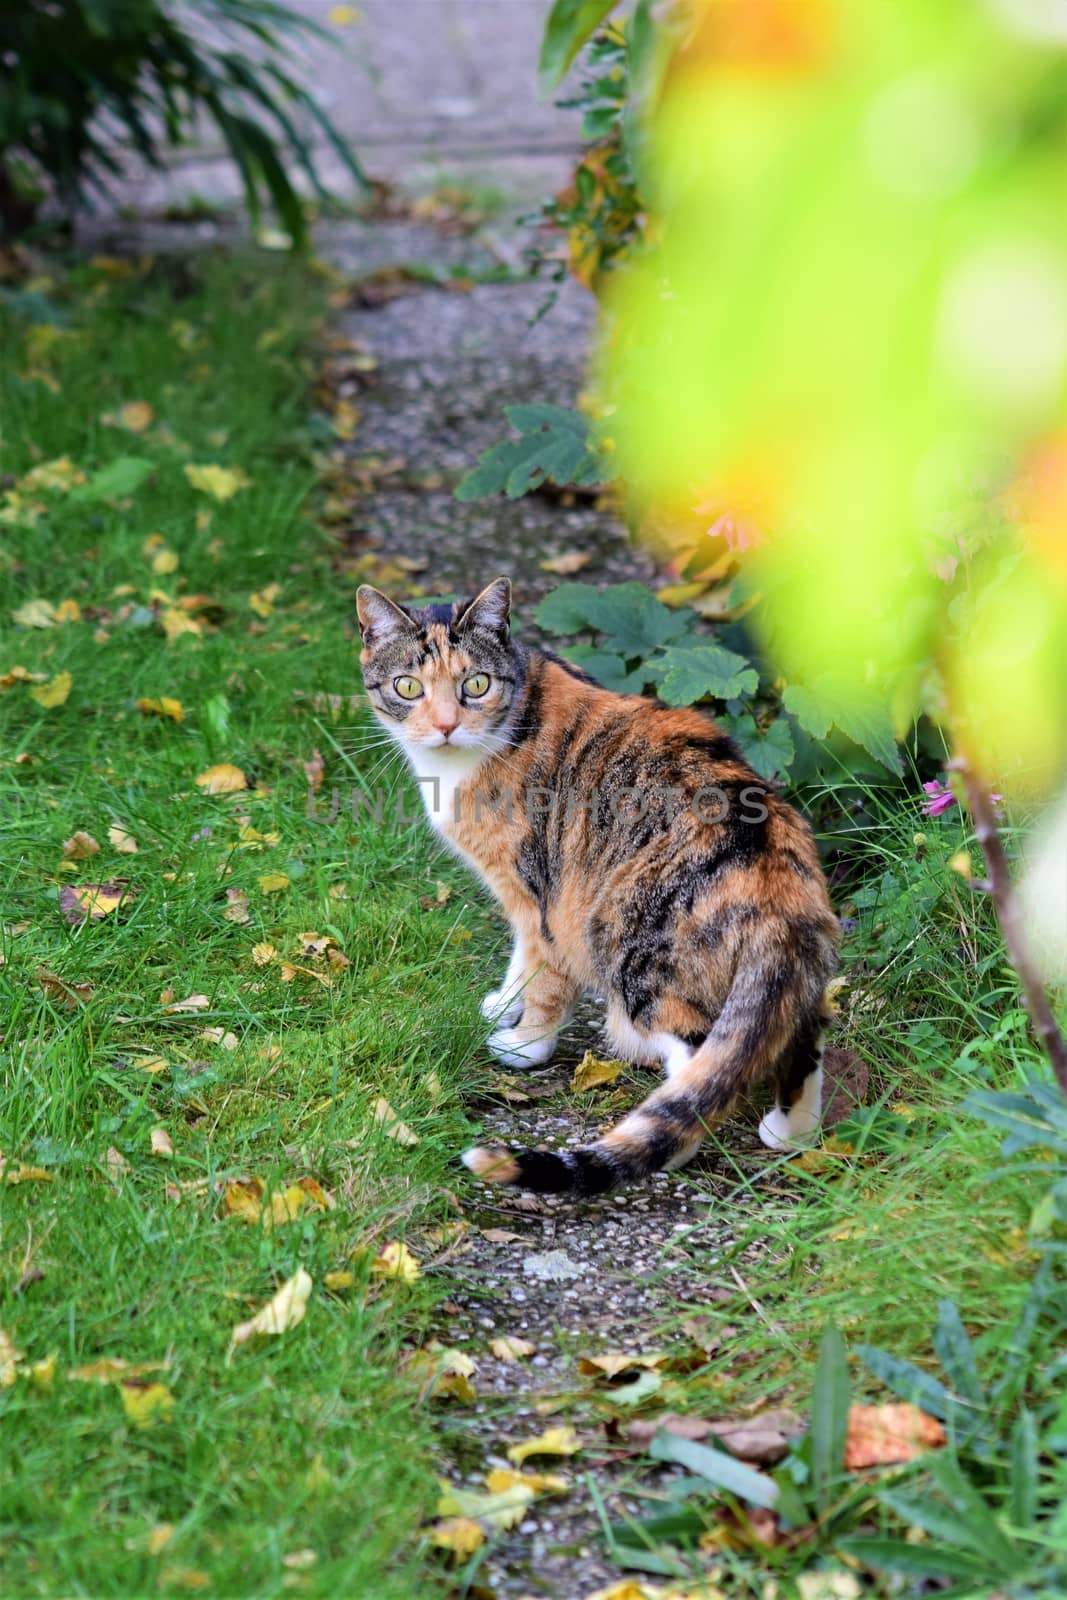 Tricolor cat turning around on a garden path by Luise123